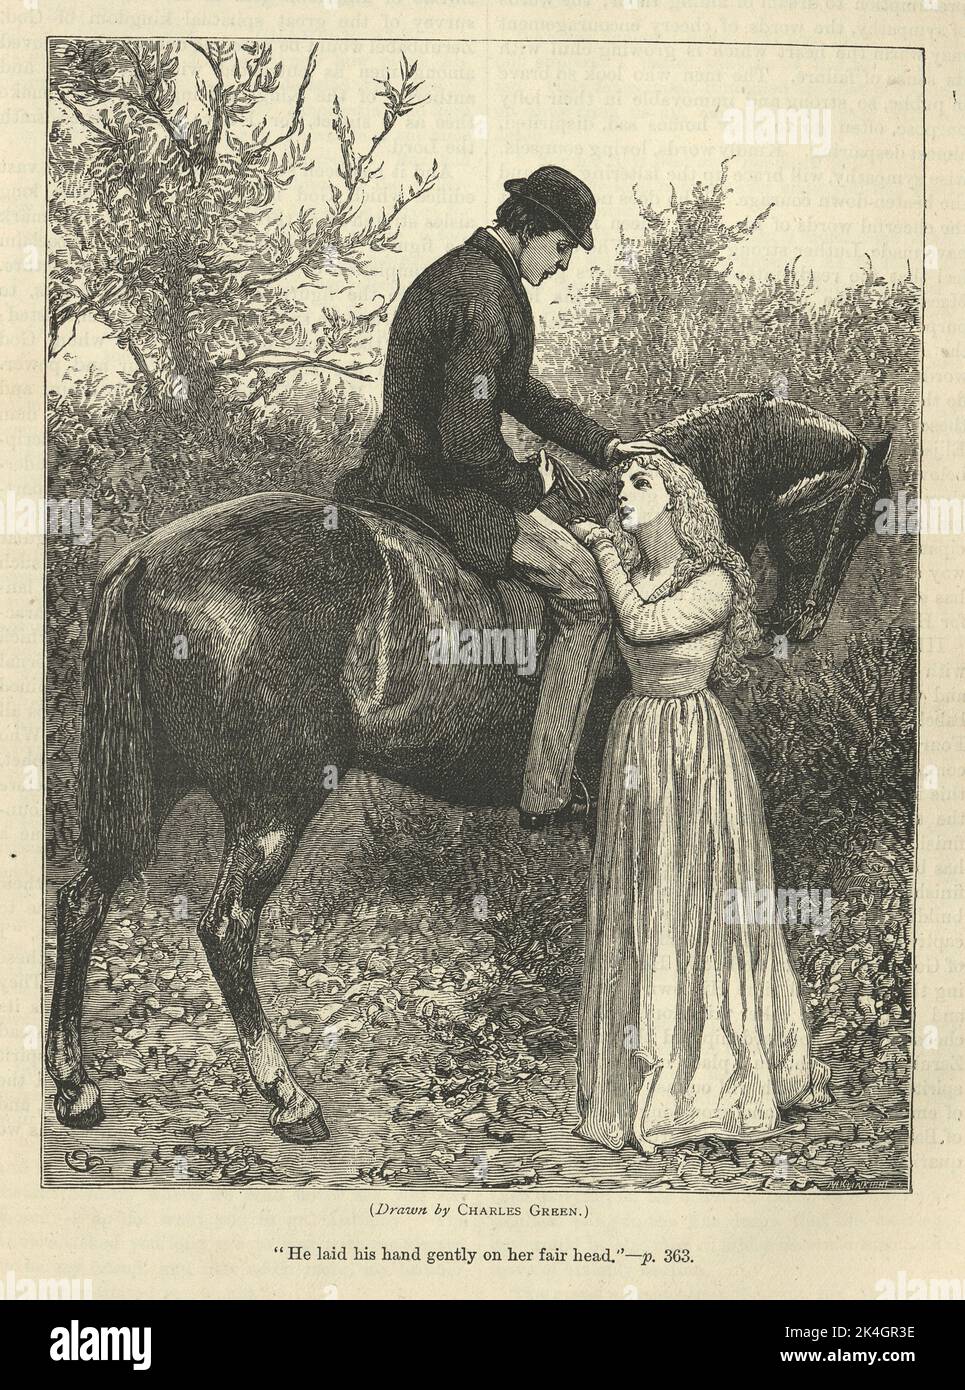 Vintage illustration Victorian romance, young couple in love, 1870s, 19th Century. He laid his hand gently on her fair head Stock Photo